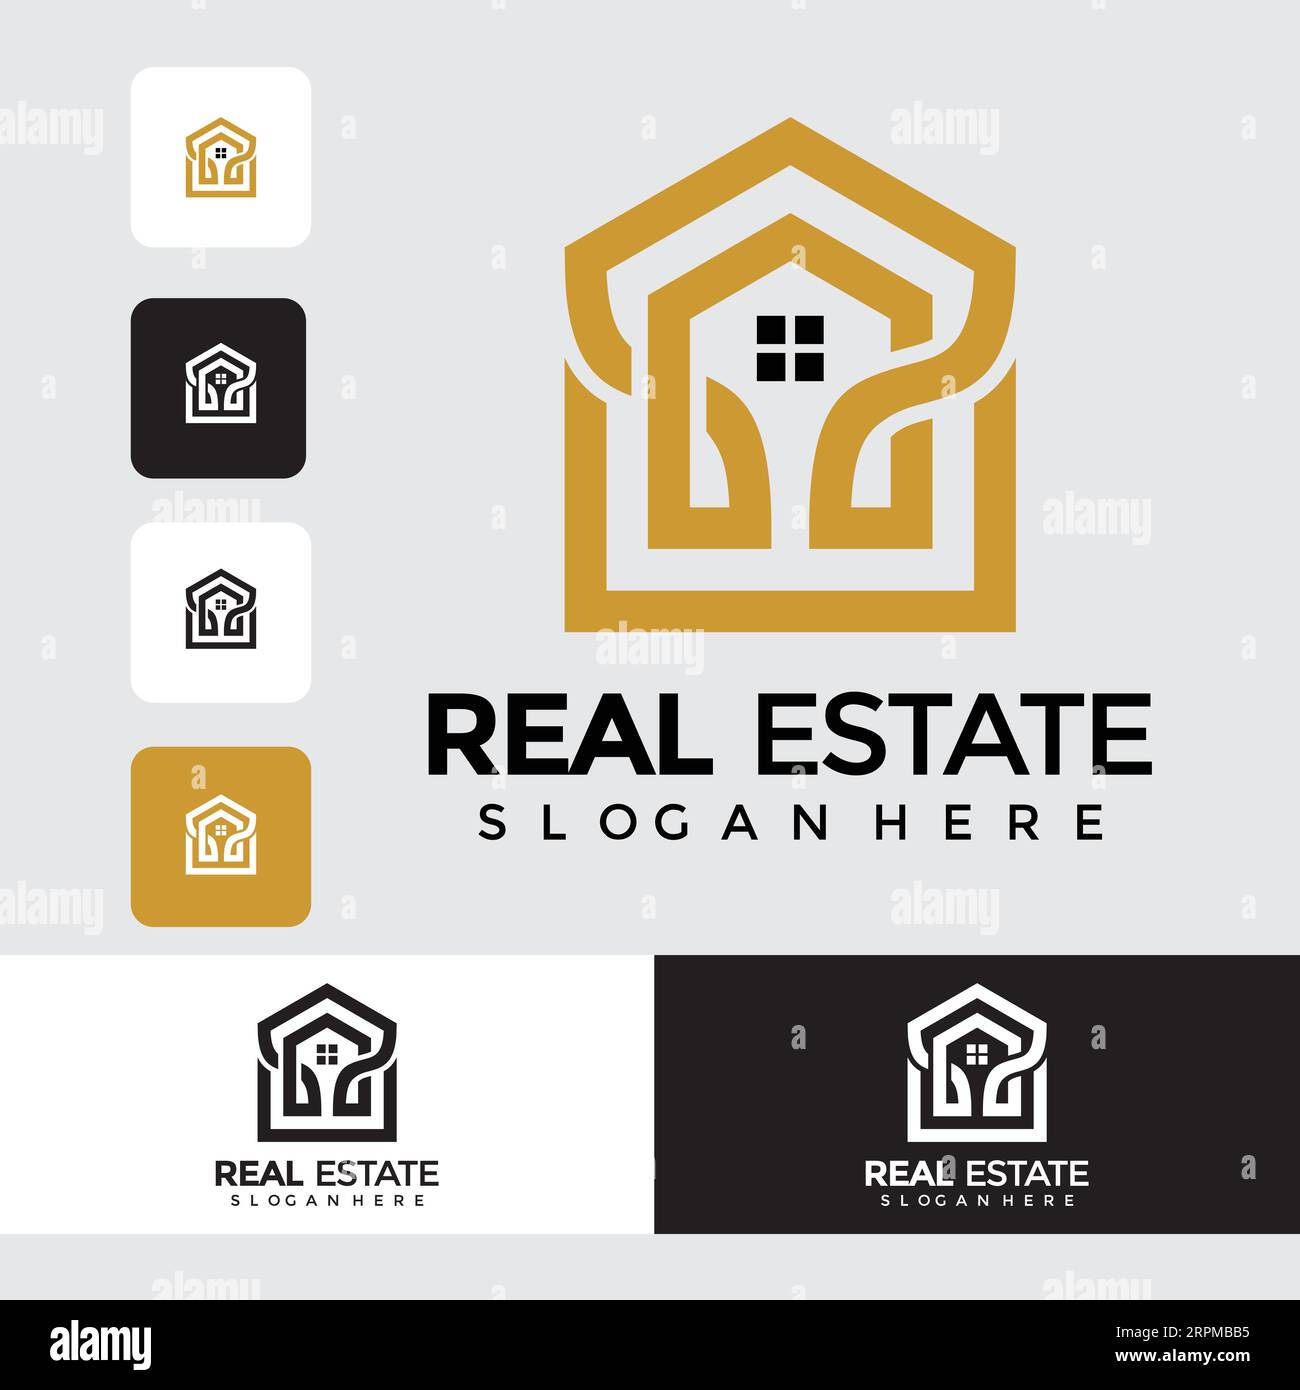 Luxury Real Estate Logo Design Building, Home, Architect, House, Construction, Property Real Estate Brand Identity Template with Real Estate Icon Desi Stock Vector